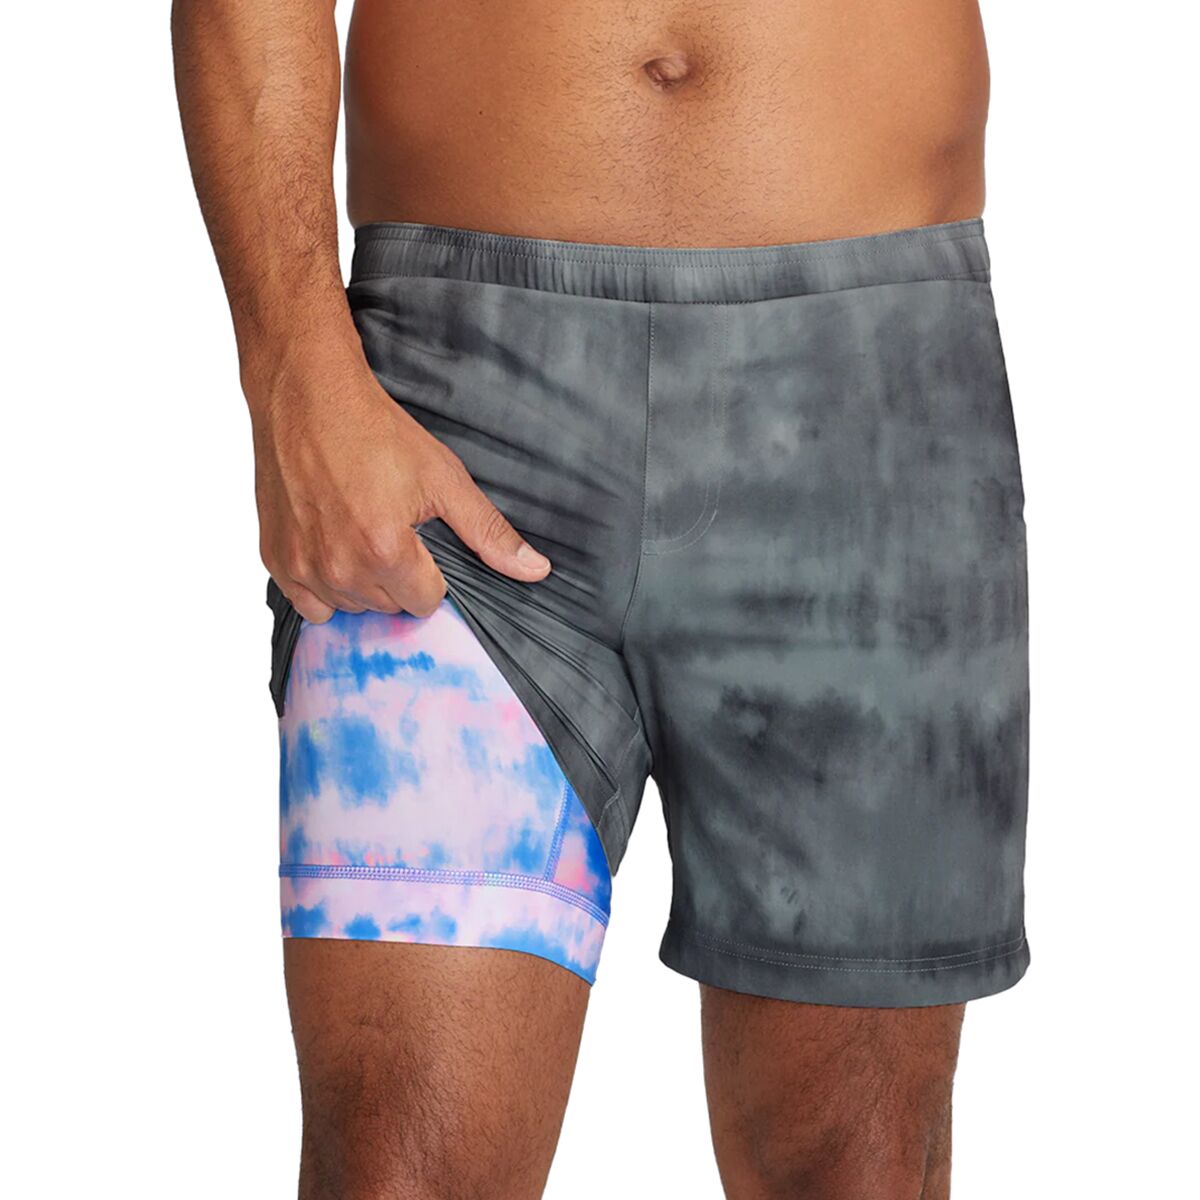 The Danger Zones 7 Compression Lined Sport